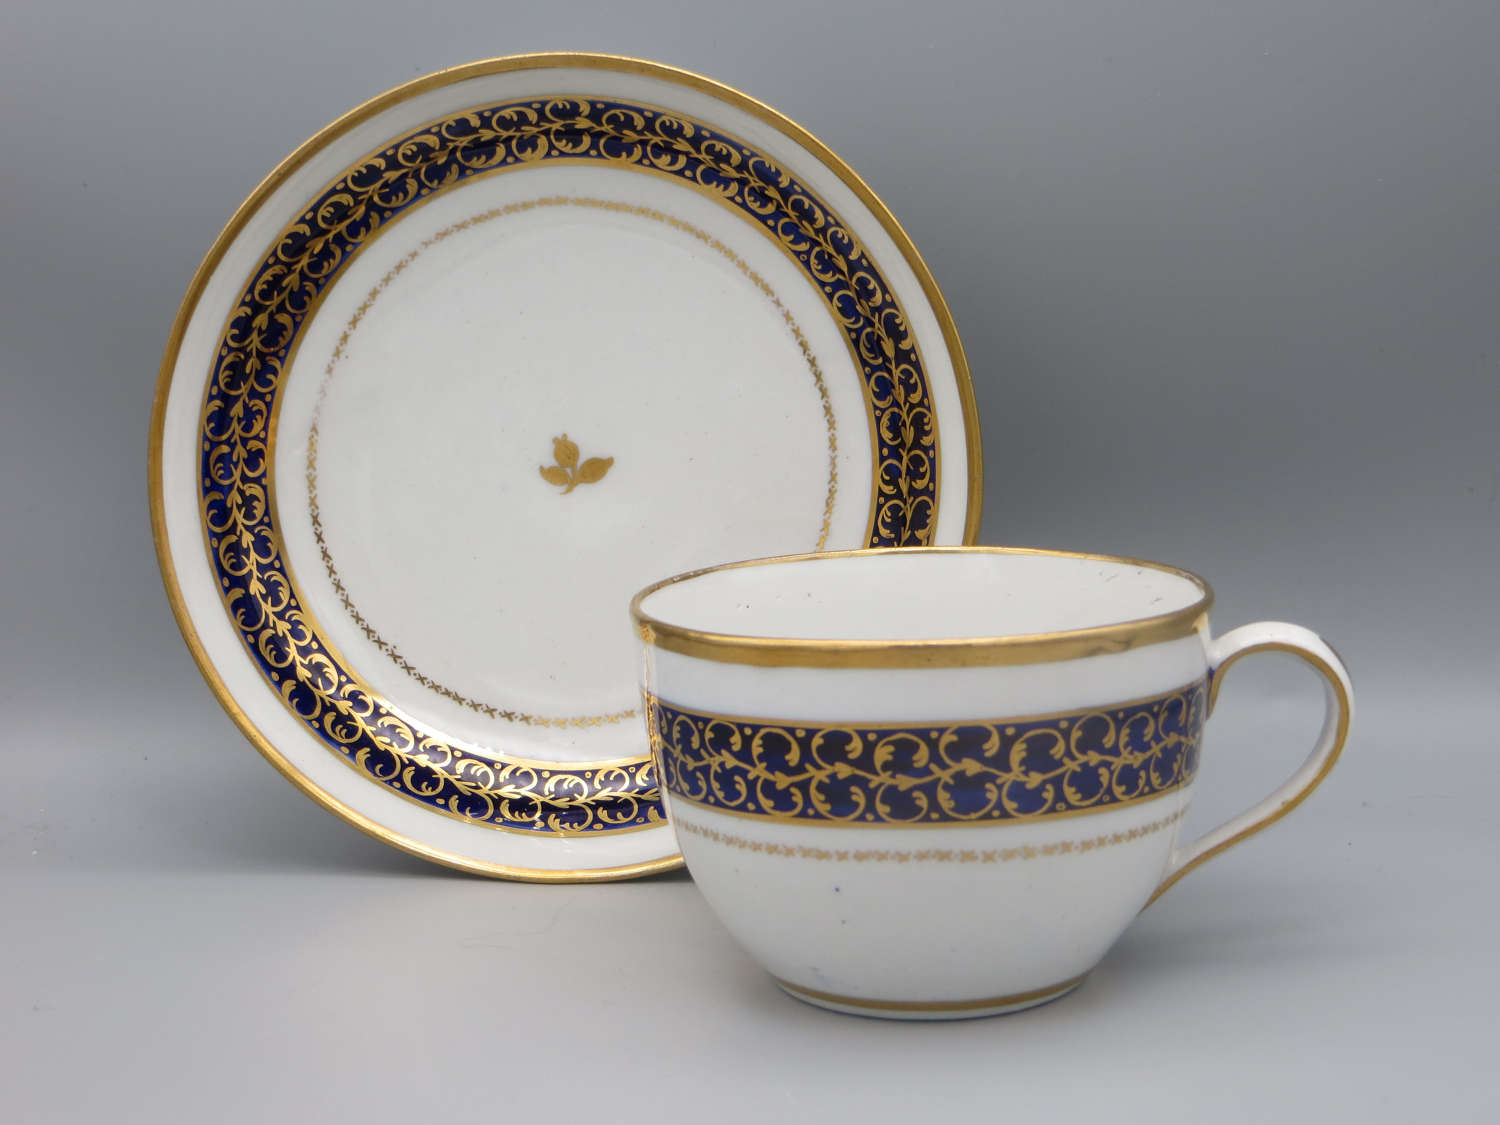 Early 19th century New Hall porcelain teacup and saucer